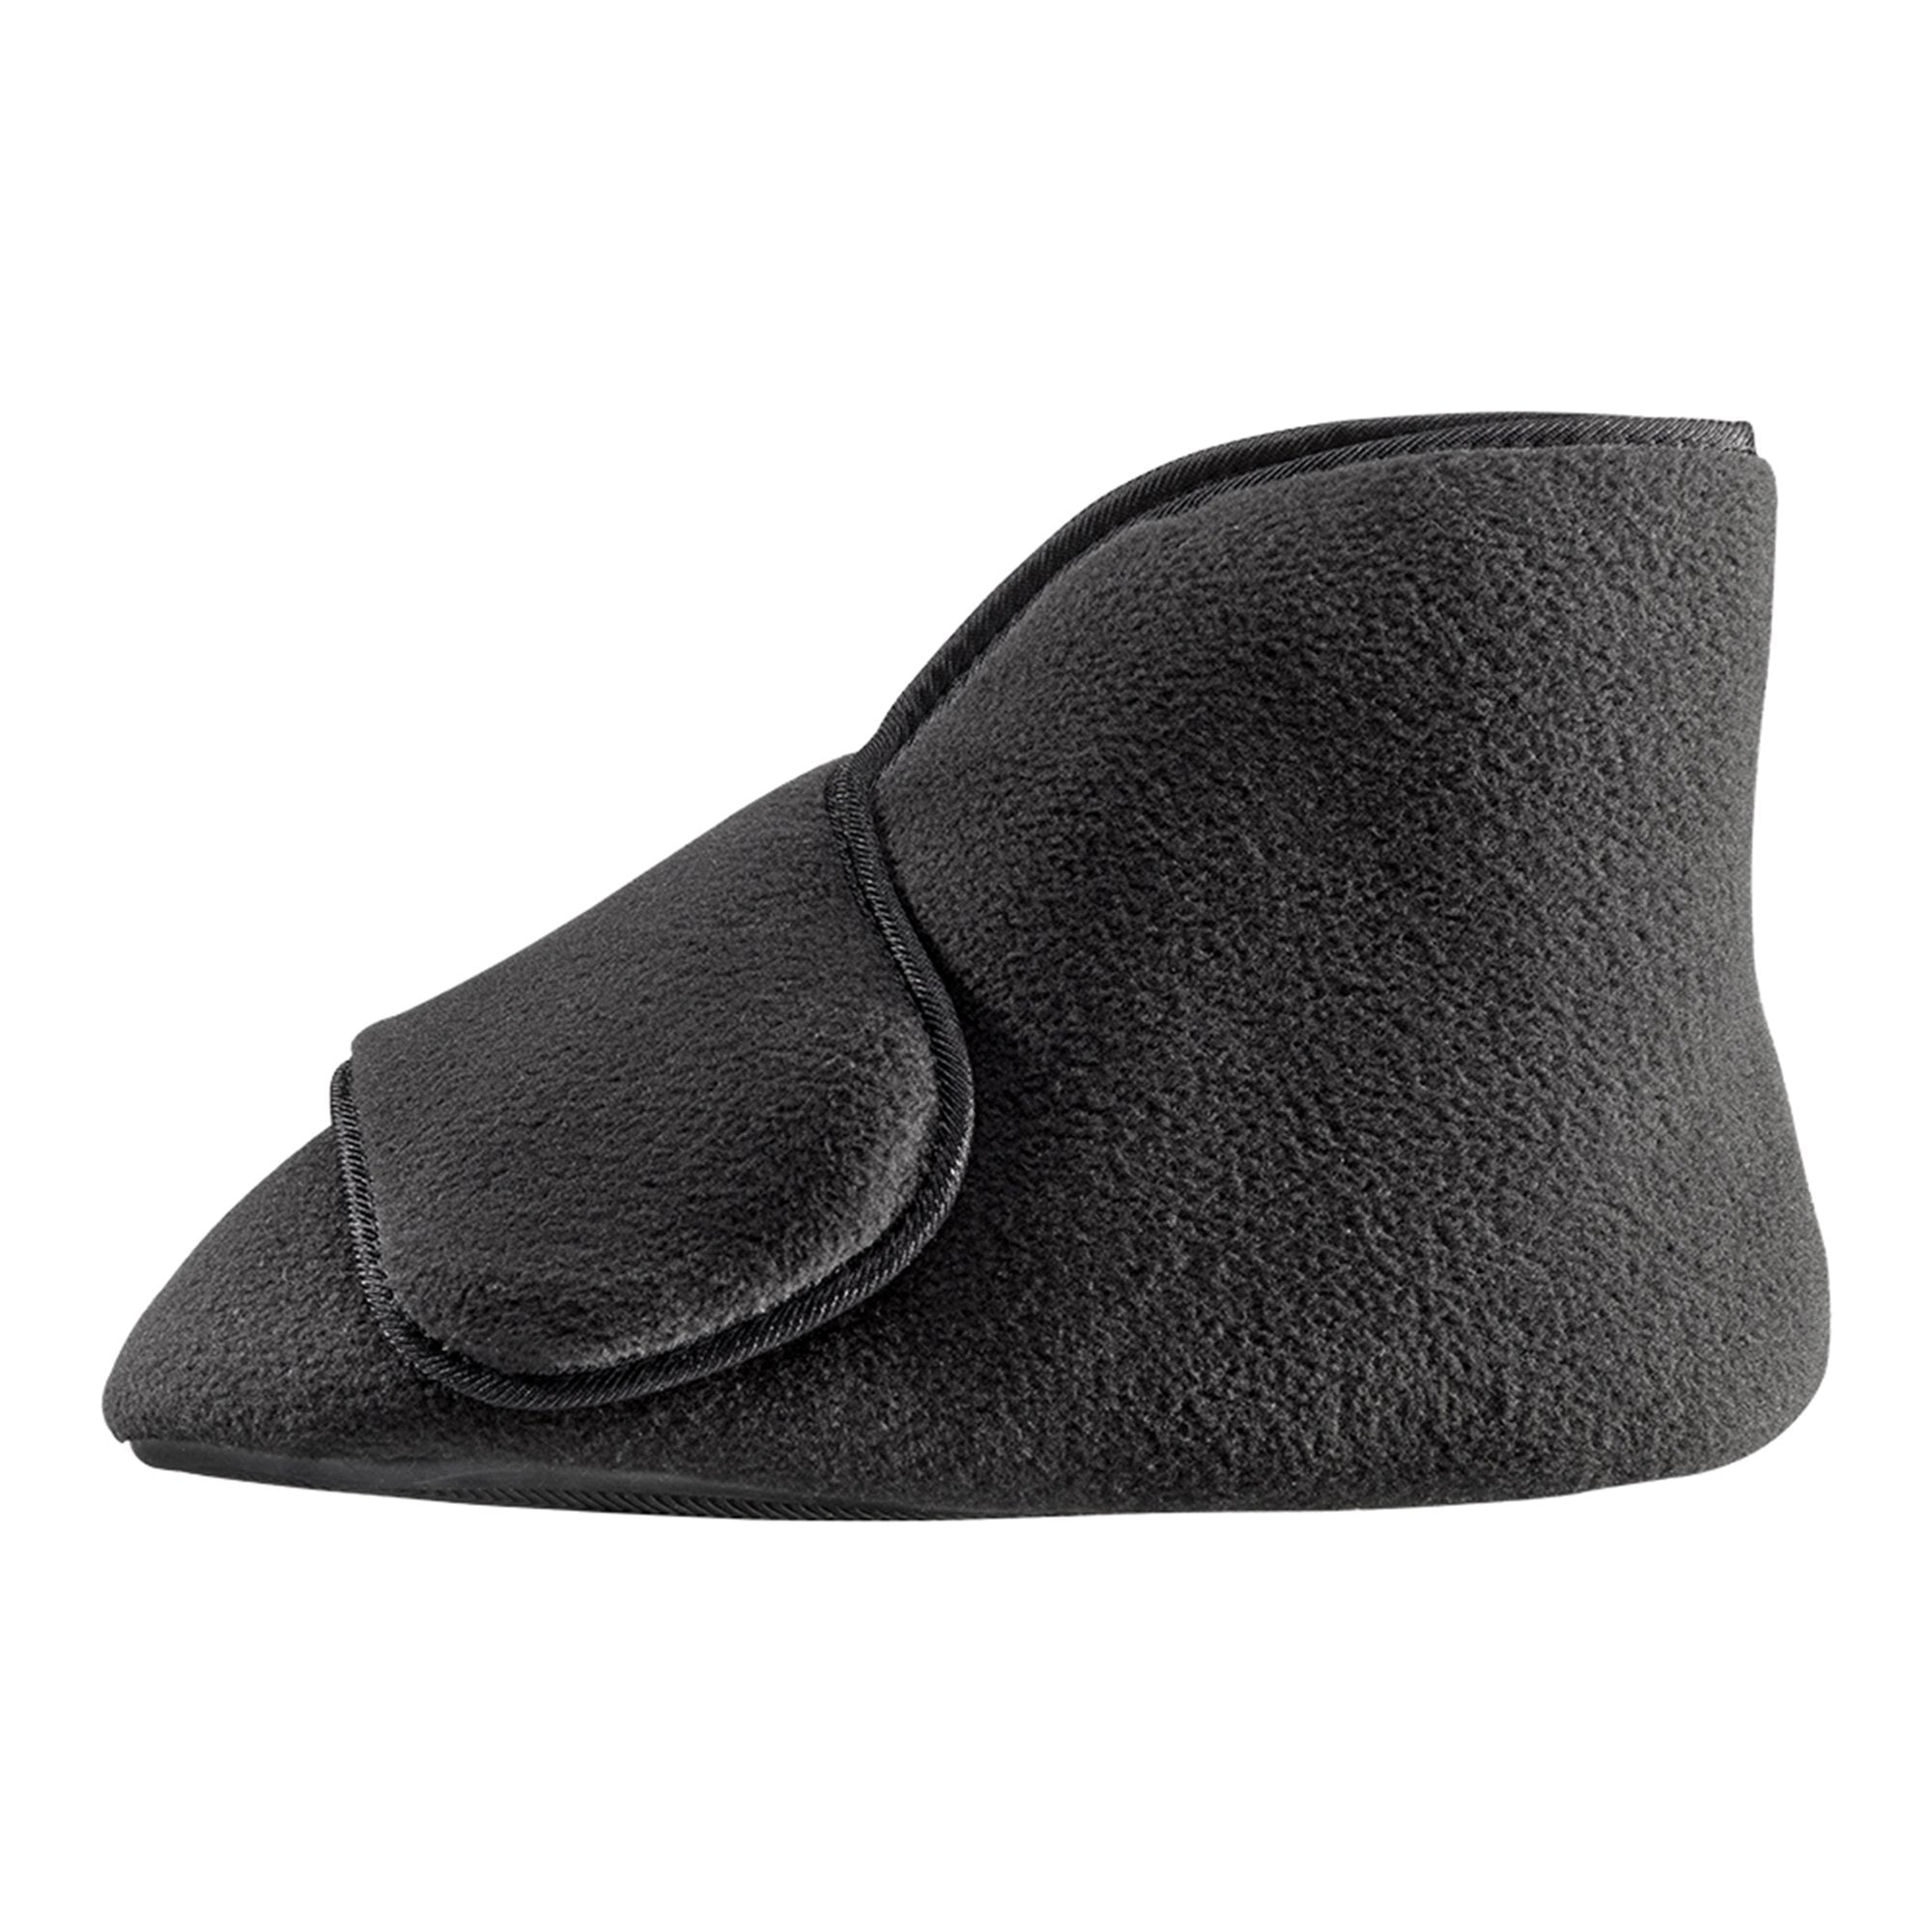 Diabetic Bootie Slippers Silverts Small / X-Wide Black Ankle High